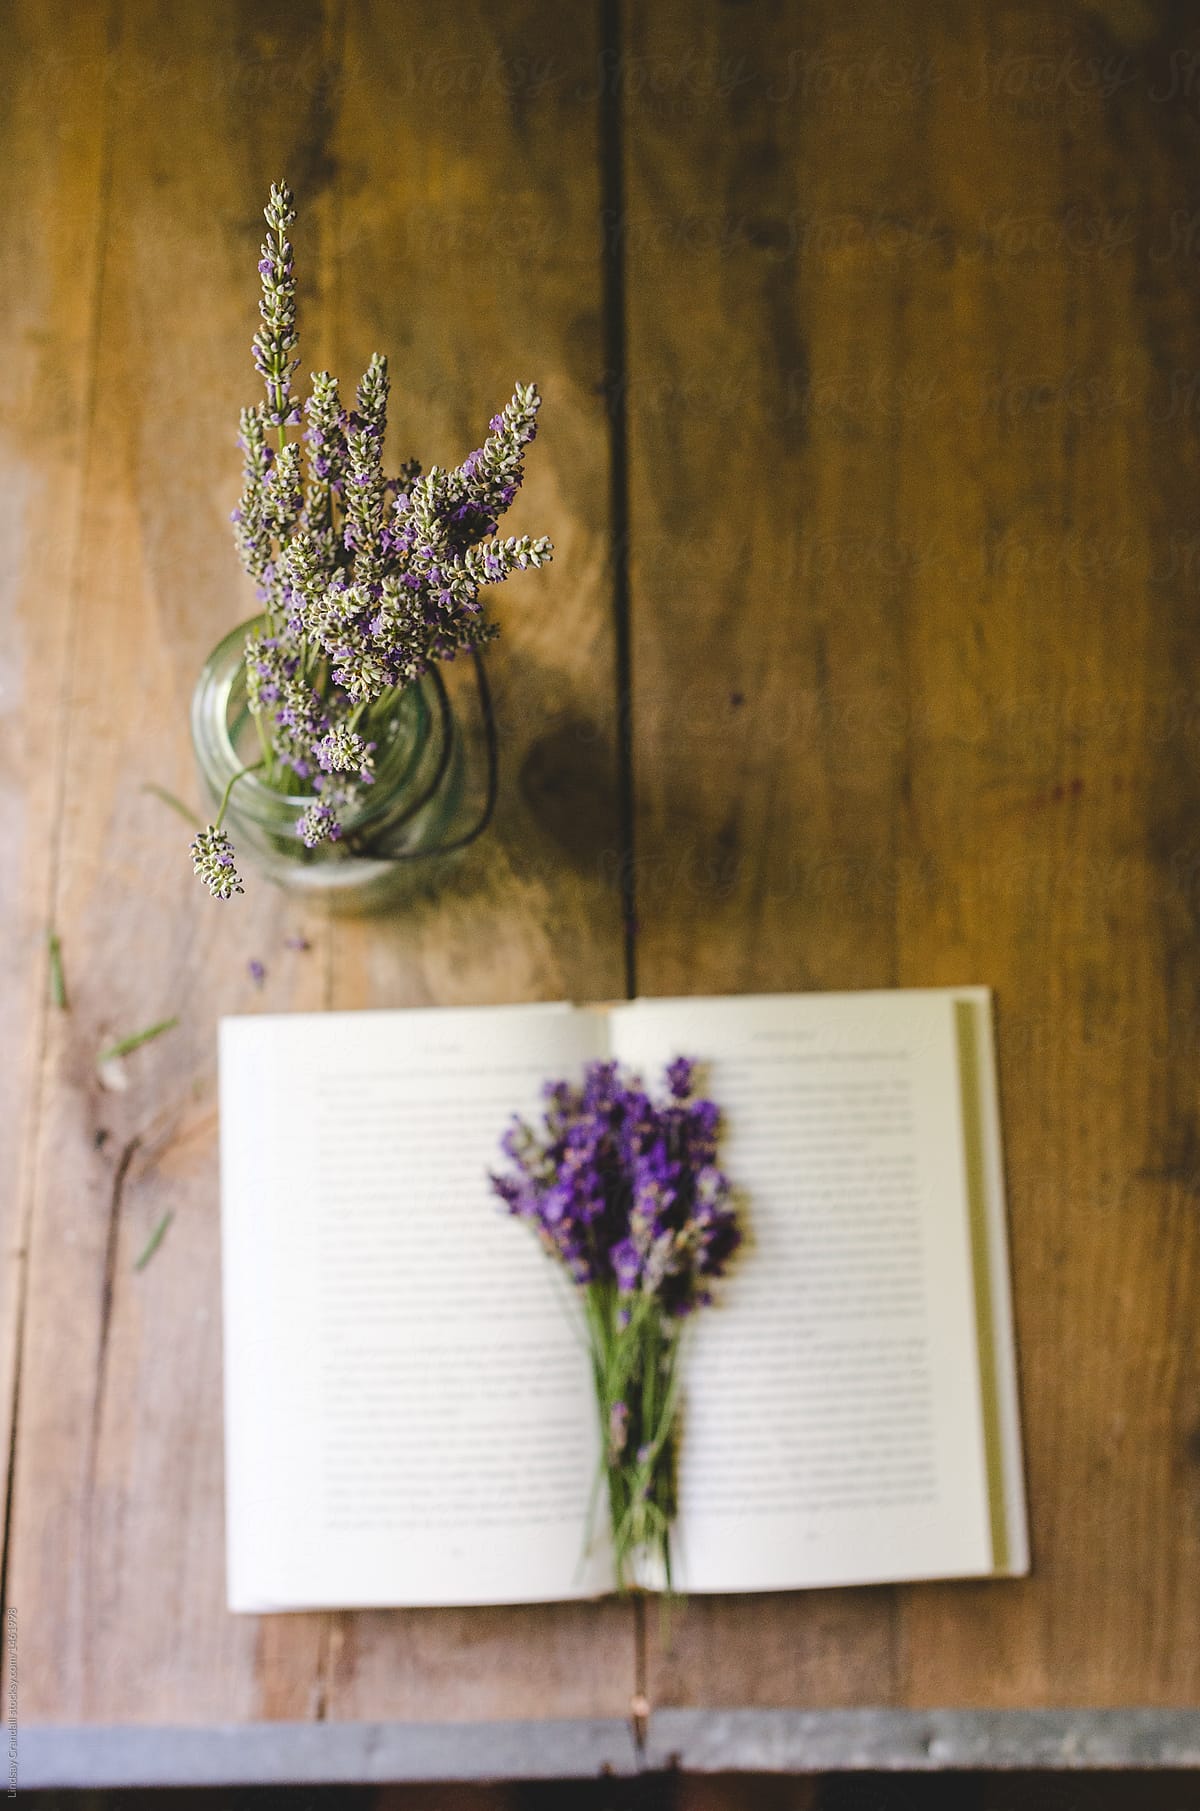 Still life with open book and fresh lavender